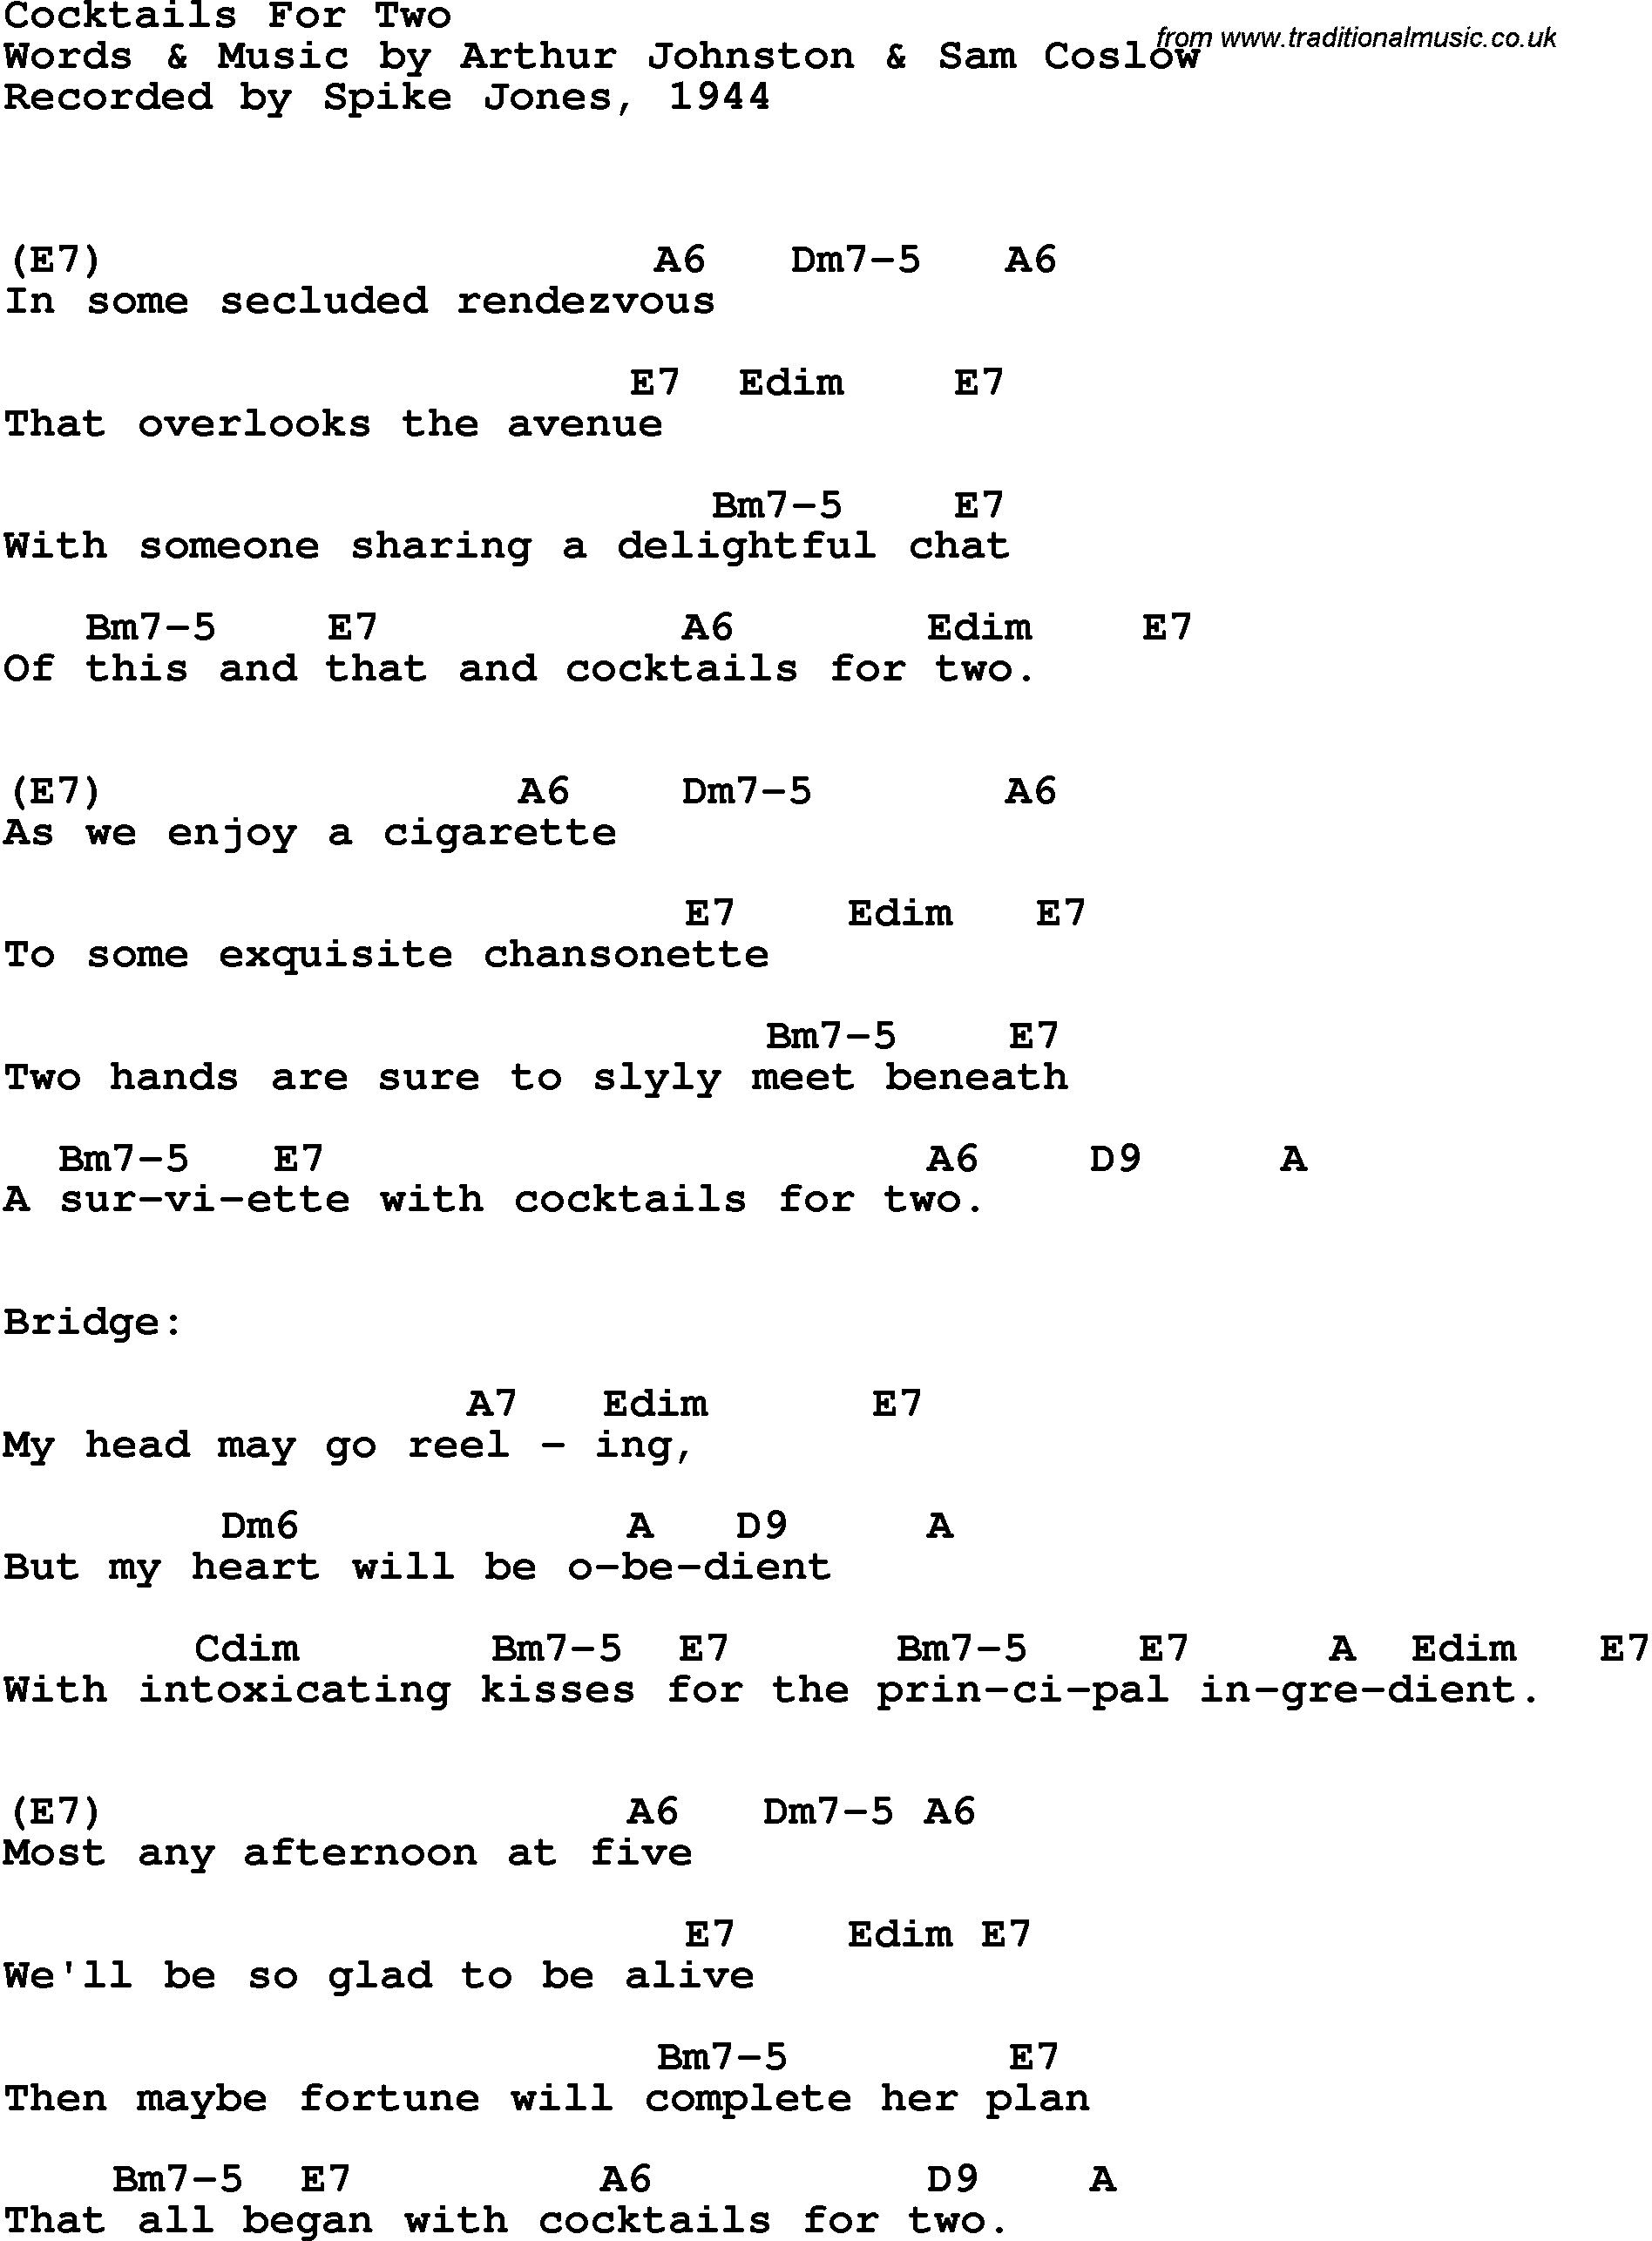 Song Lyrics with guitar chords for Cocktails For Two - Spike Jones, 1944